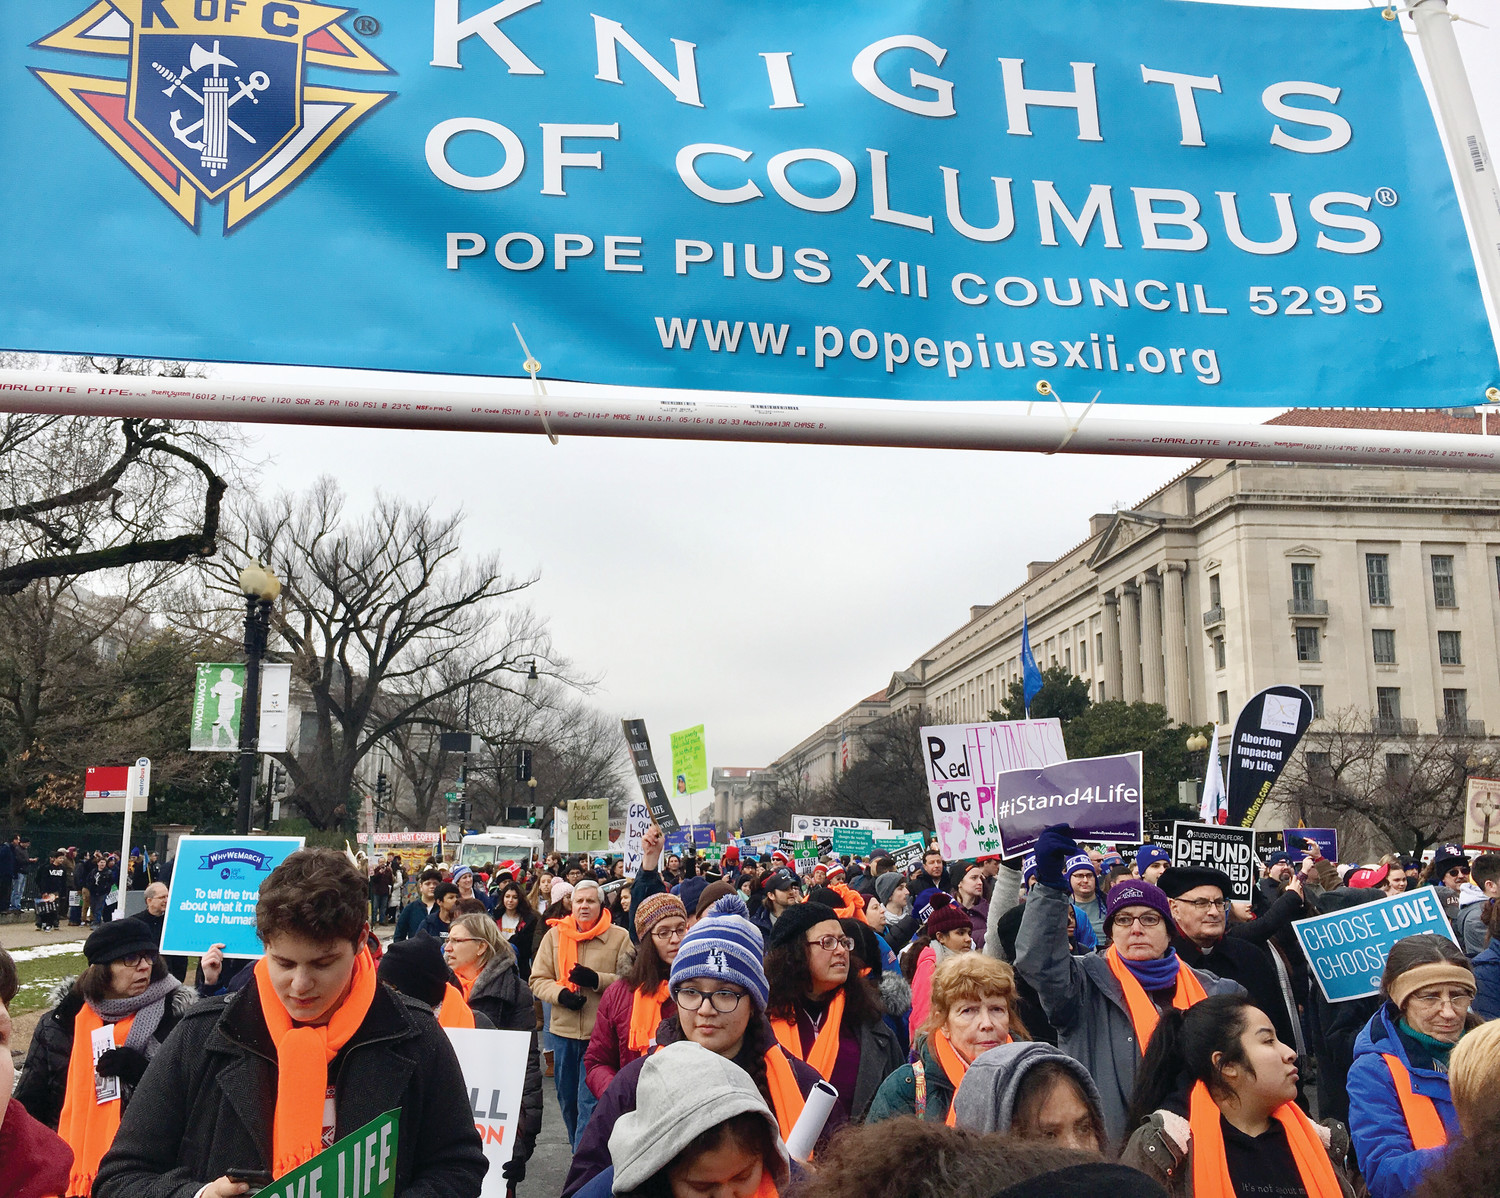 Members of the Diocese of Providence delegation march down Pennsylvania Avenue on their way to the U.S. Capitol and Supreme Court. Individuals from parishes throughout the diocese took part in the March including St. Mary’s (Broadway), 
St. Patrick, St. Luke, St. Thomas More and St Pius X.